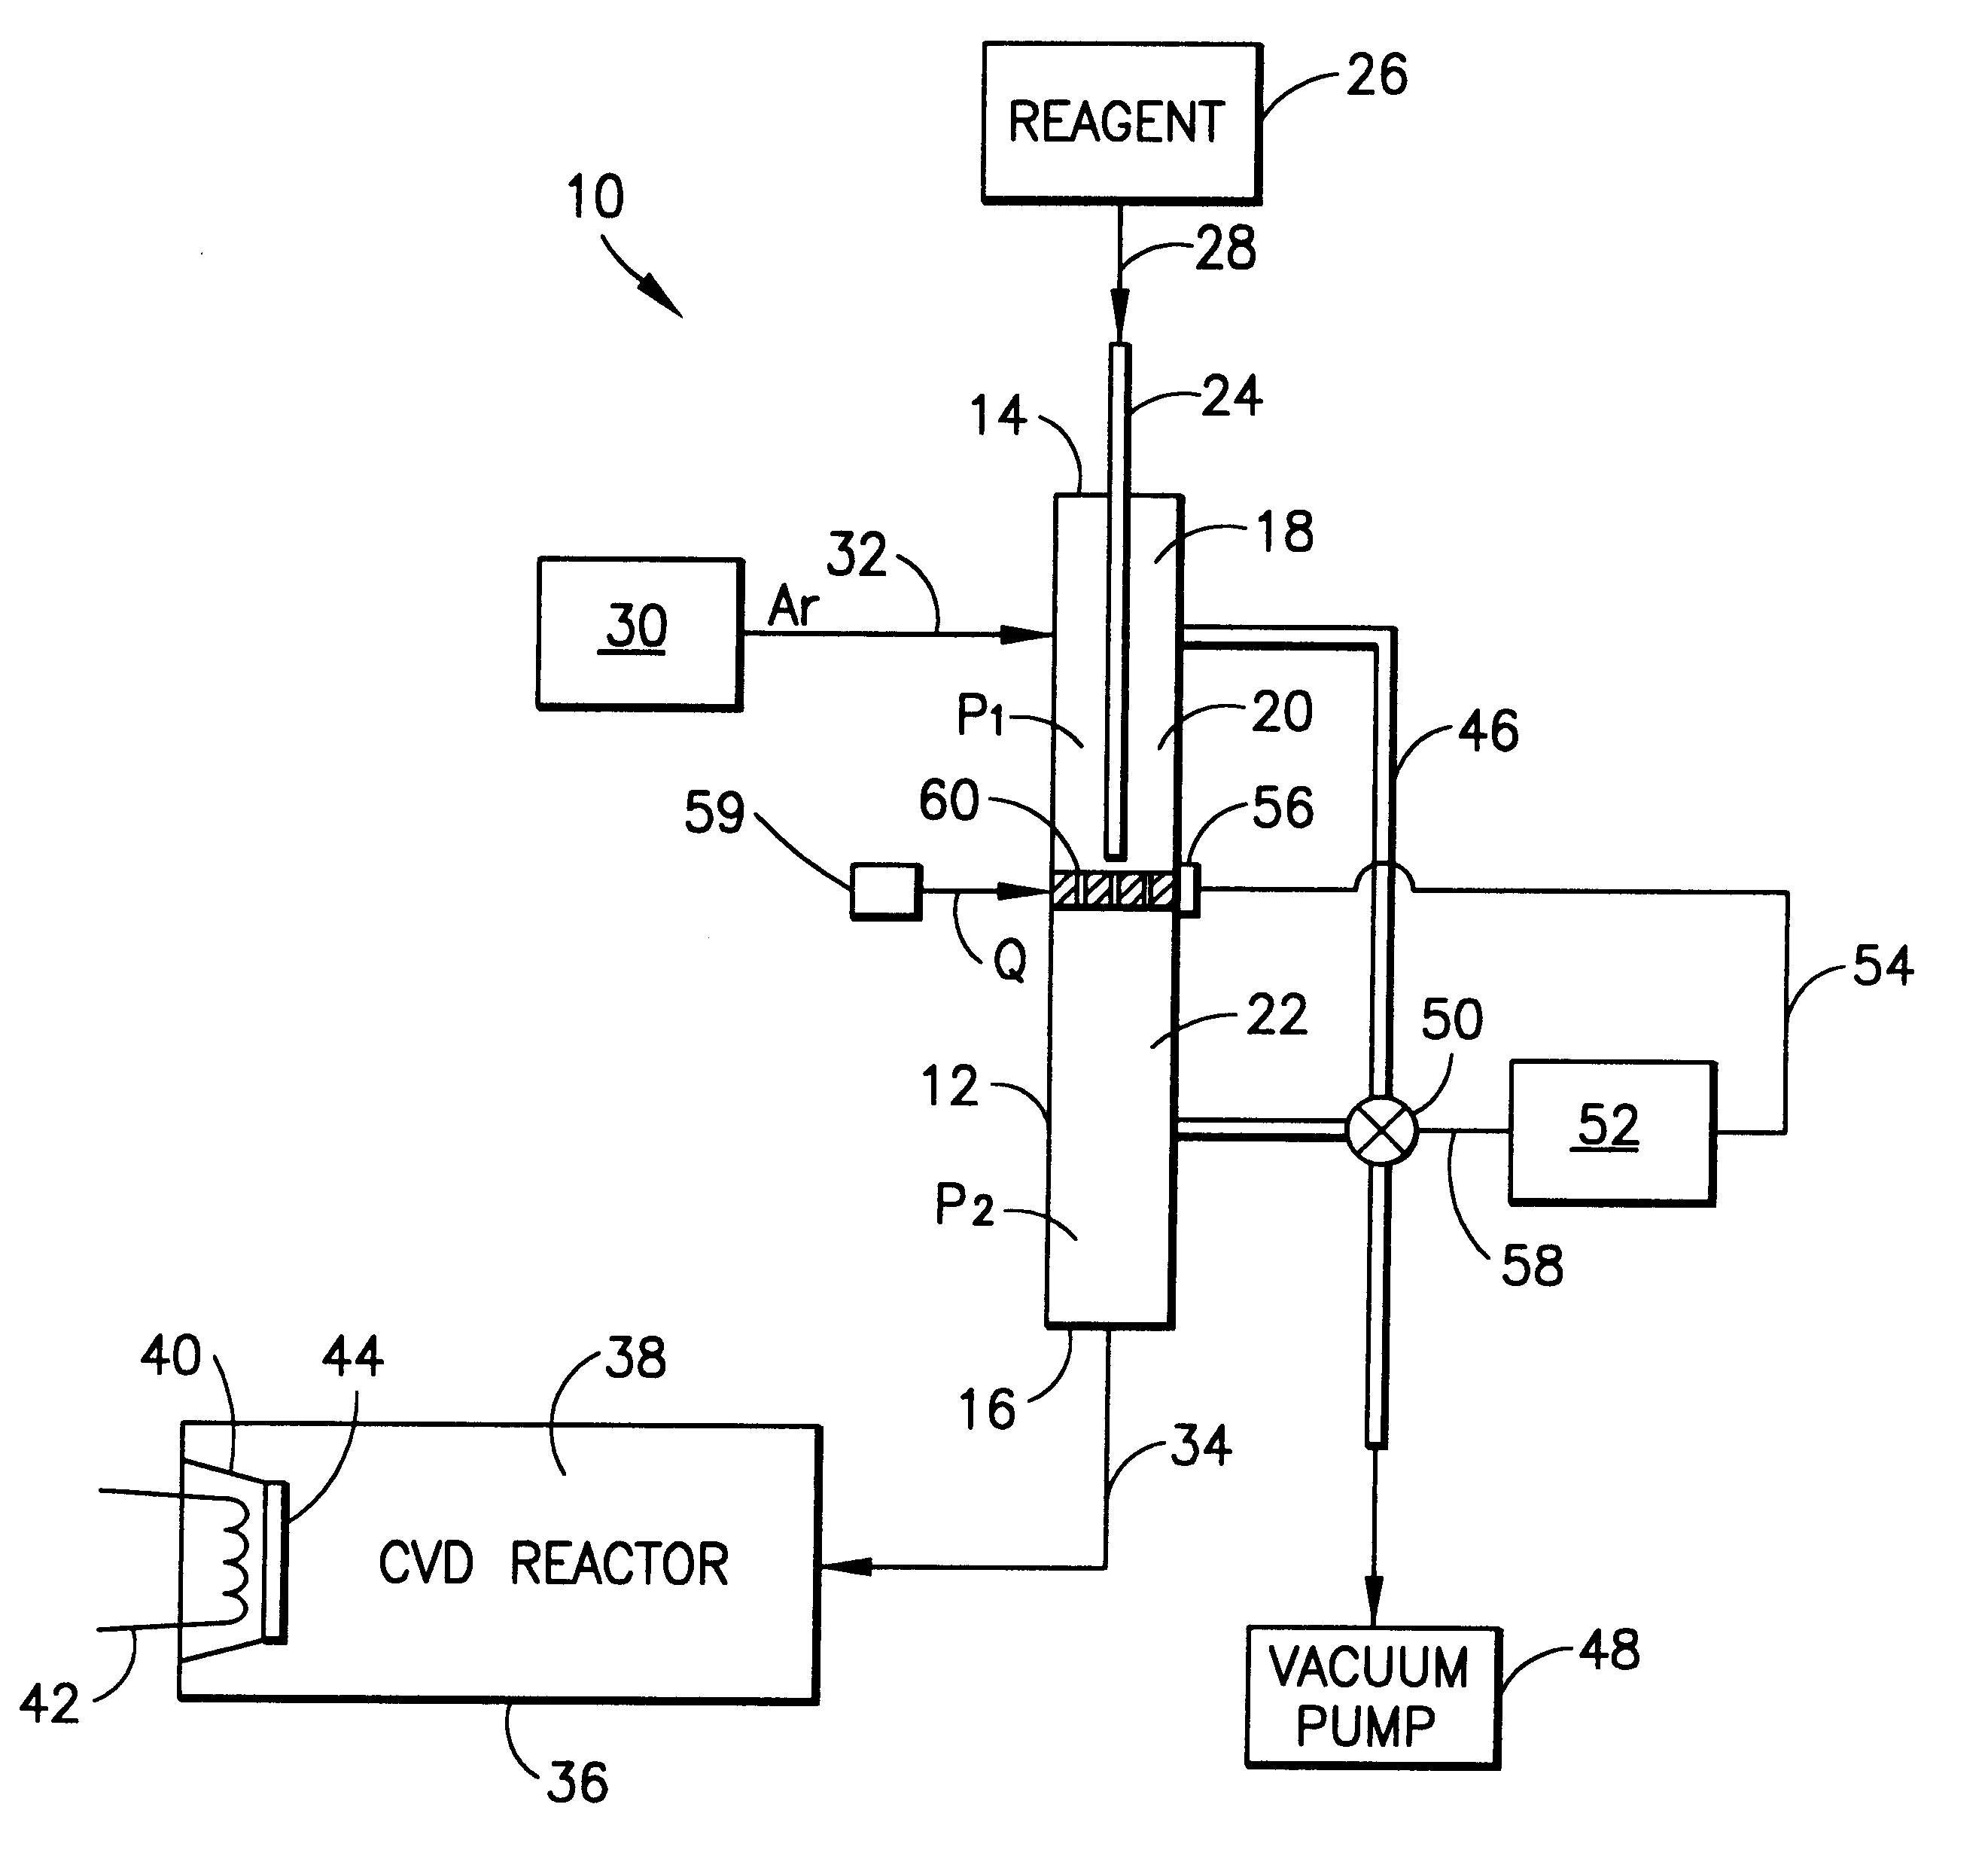 Liquid delivery system comprising upstream pressure control means